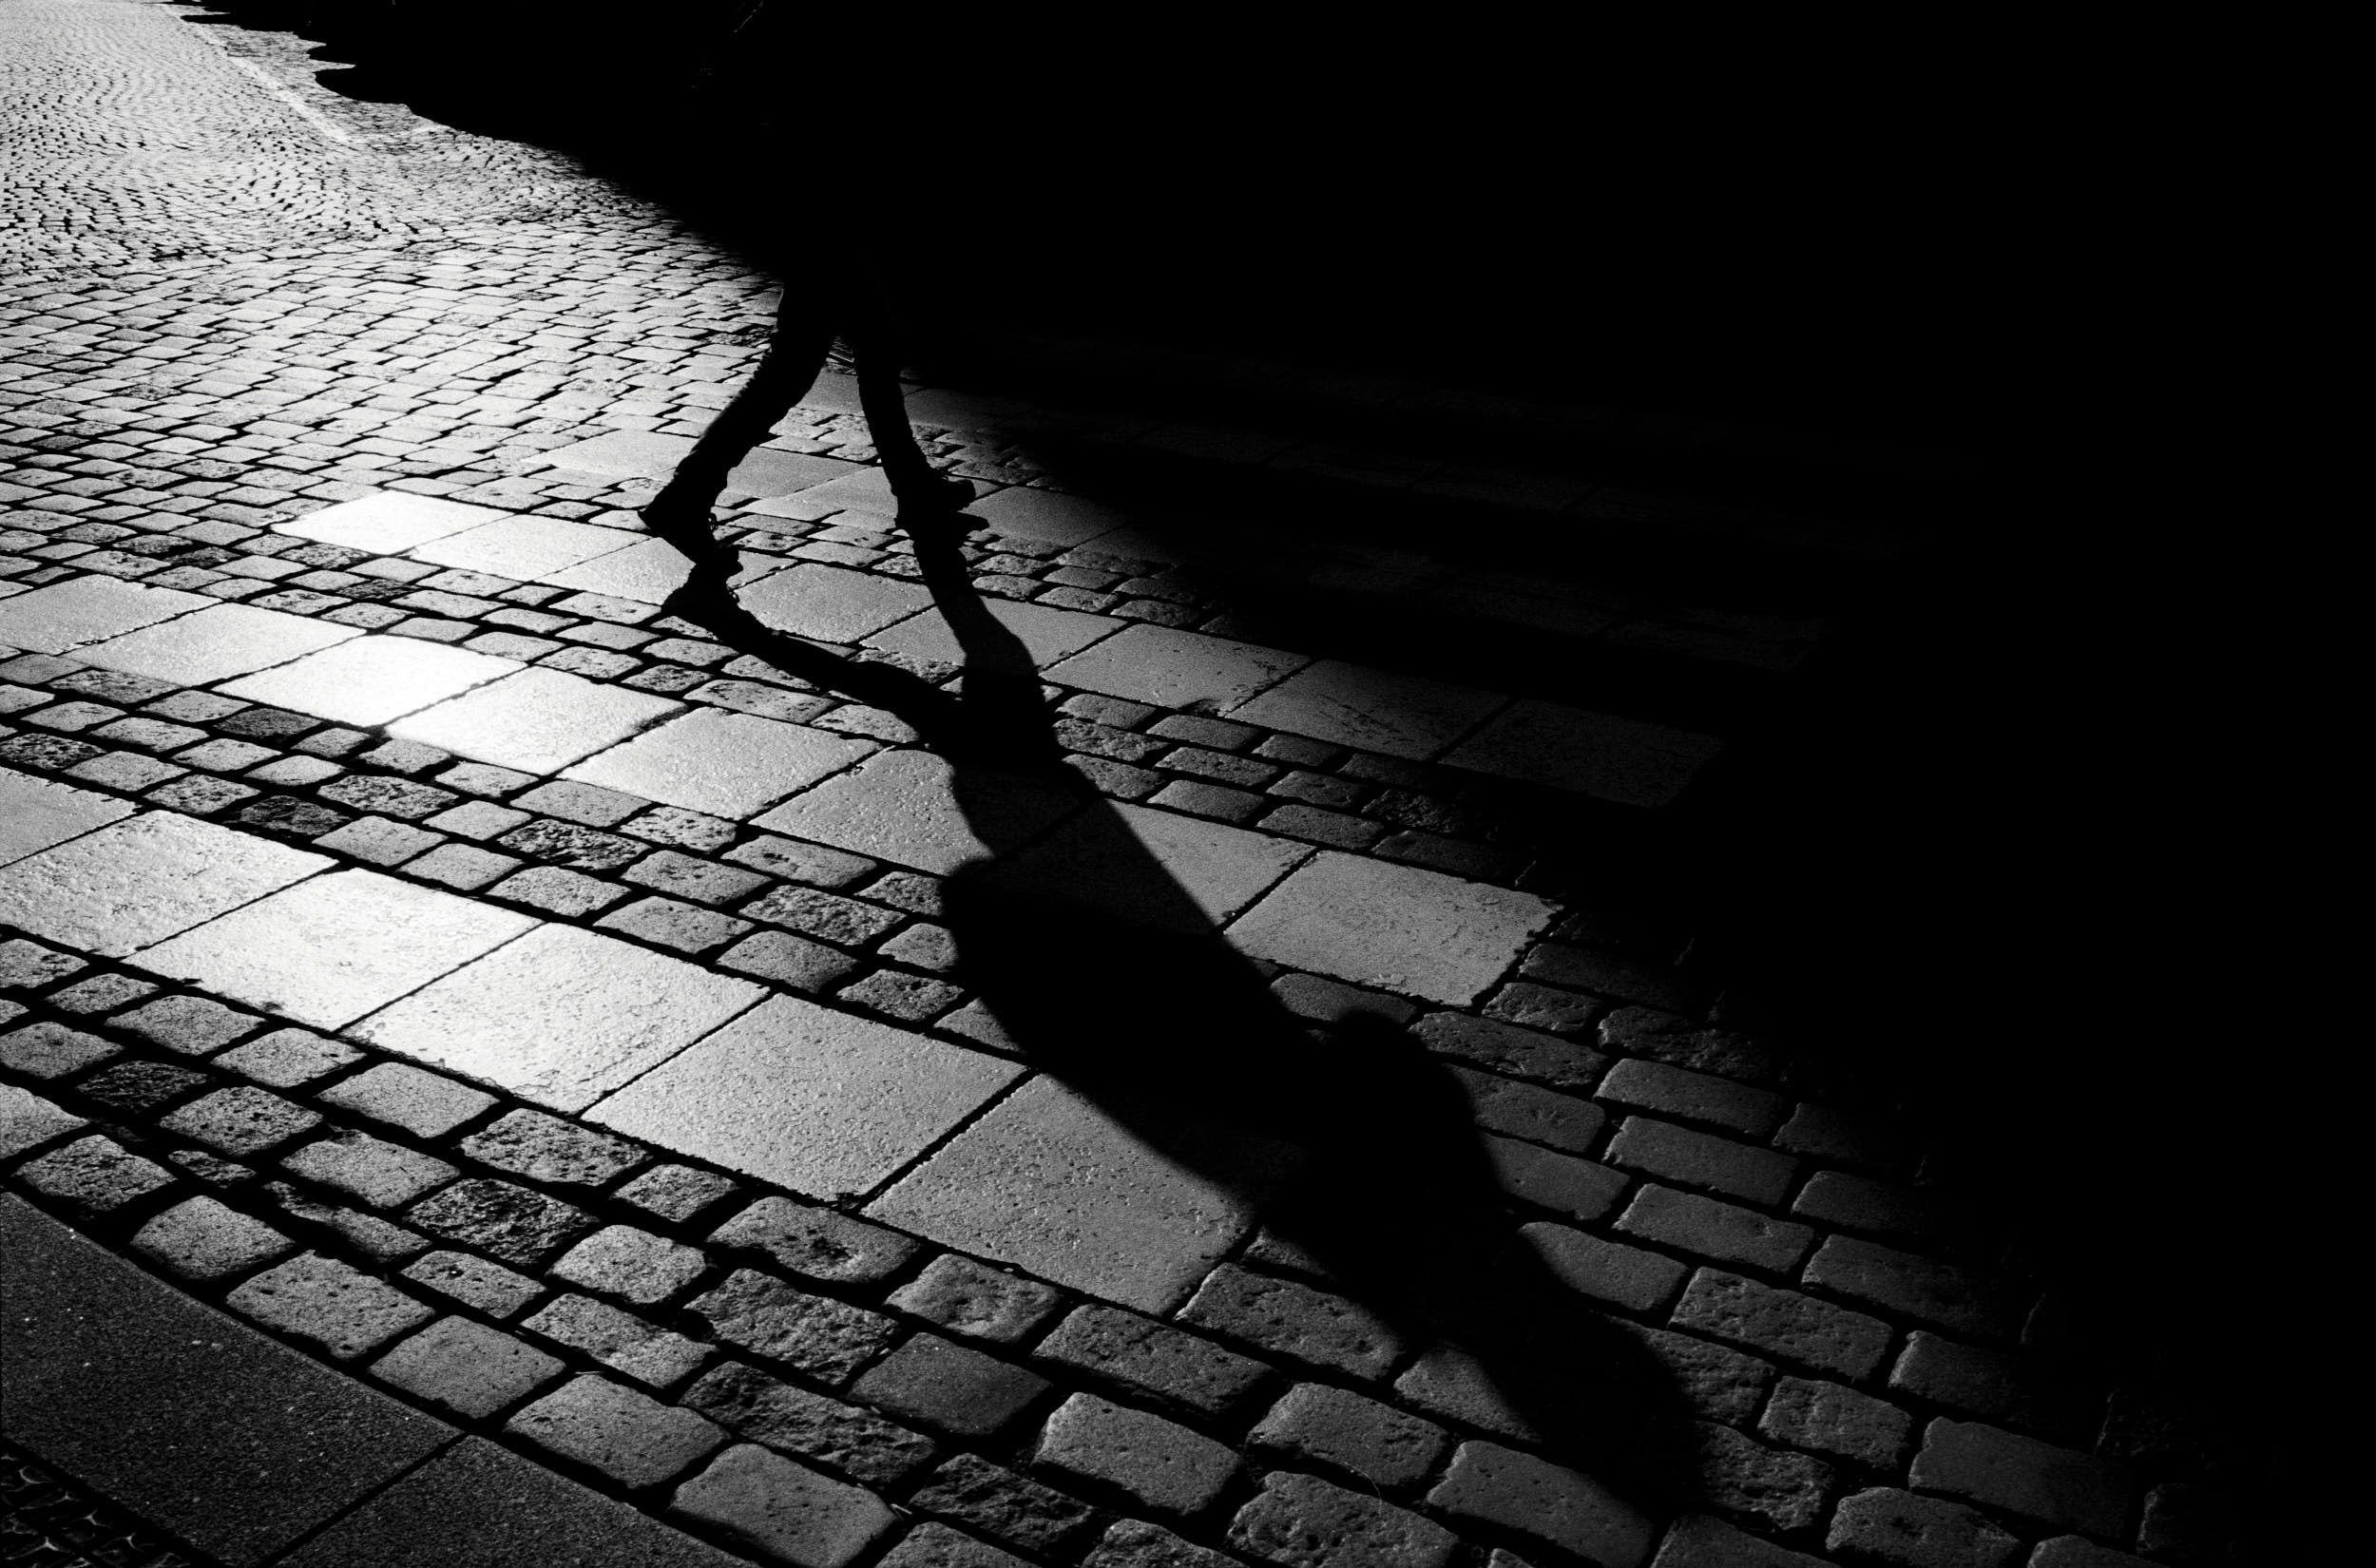 High contrast film street photography: man on a pedestrian crossing with deep shadows and geometric composition.